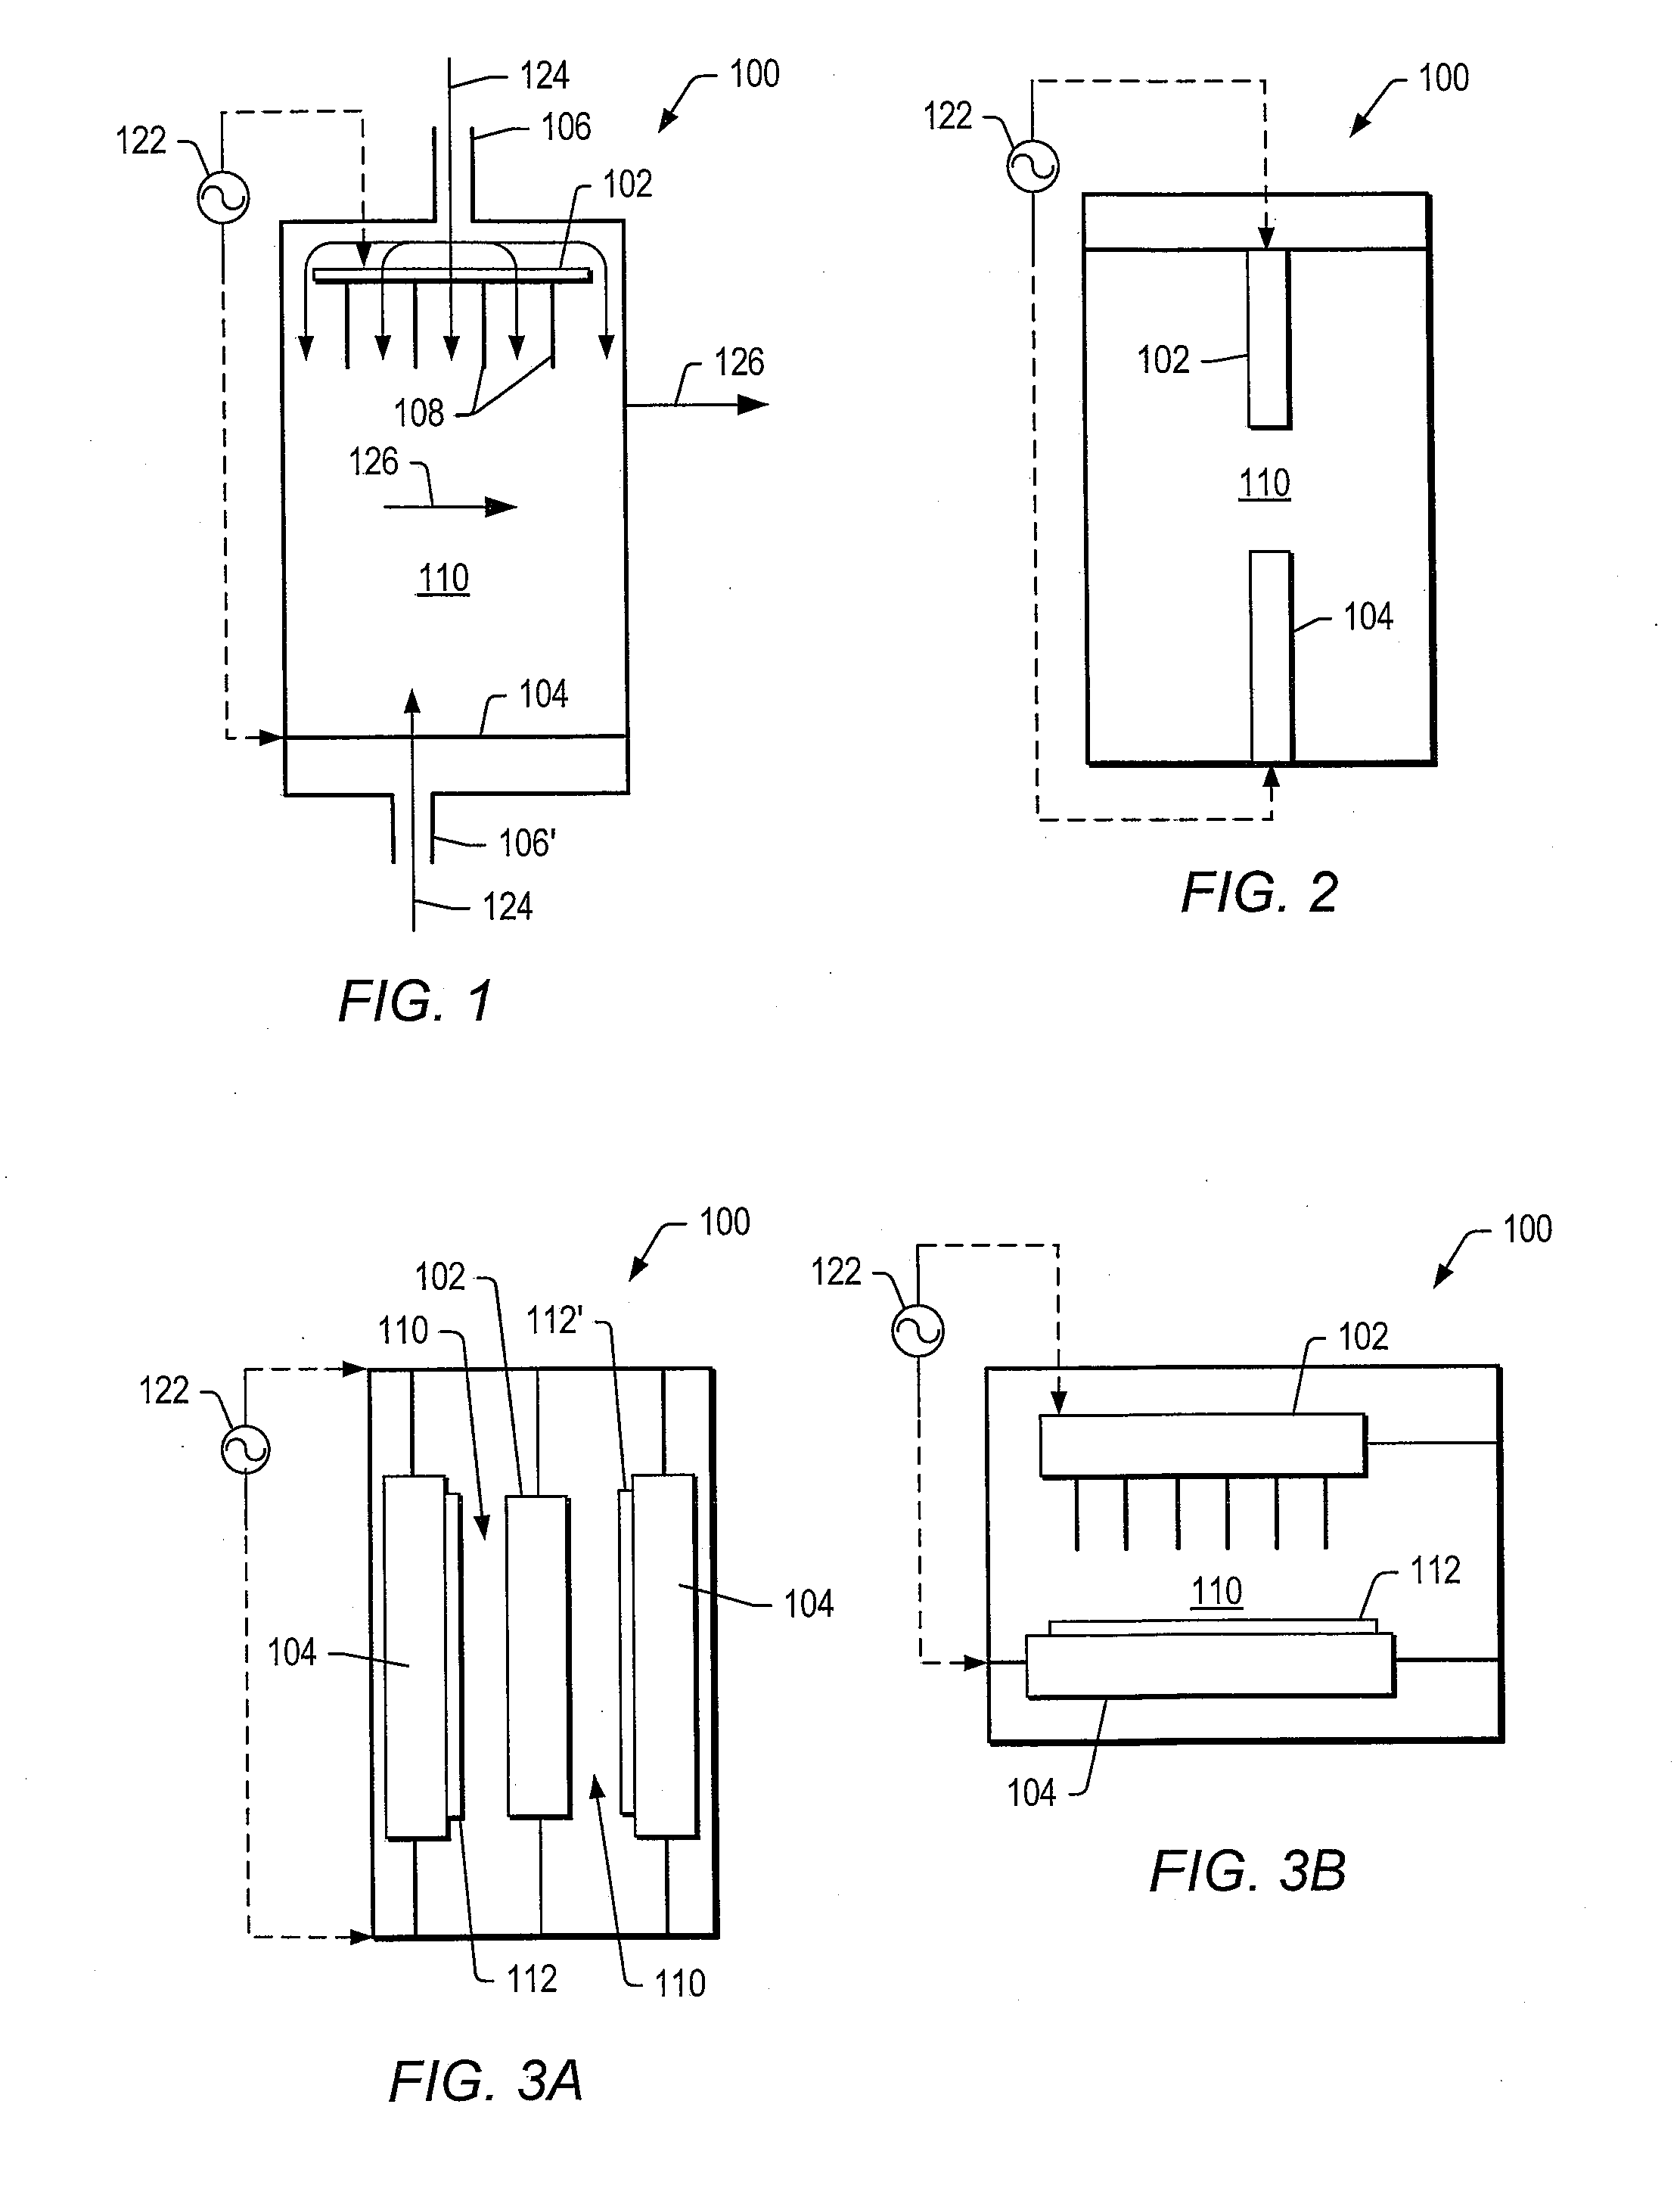 Methods and systems for producing fuel for an internal combustion engine using a low-temperature plasma system